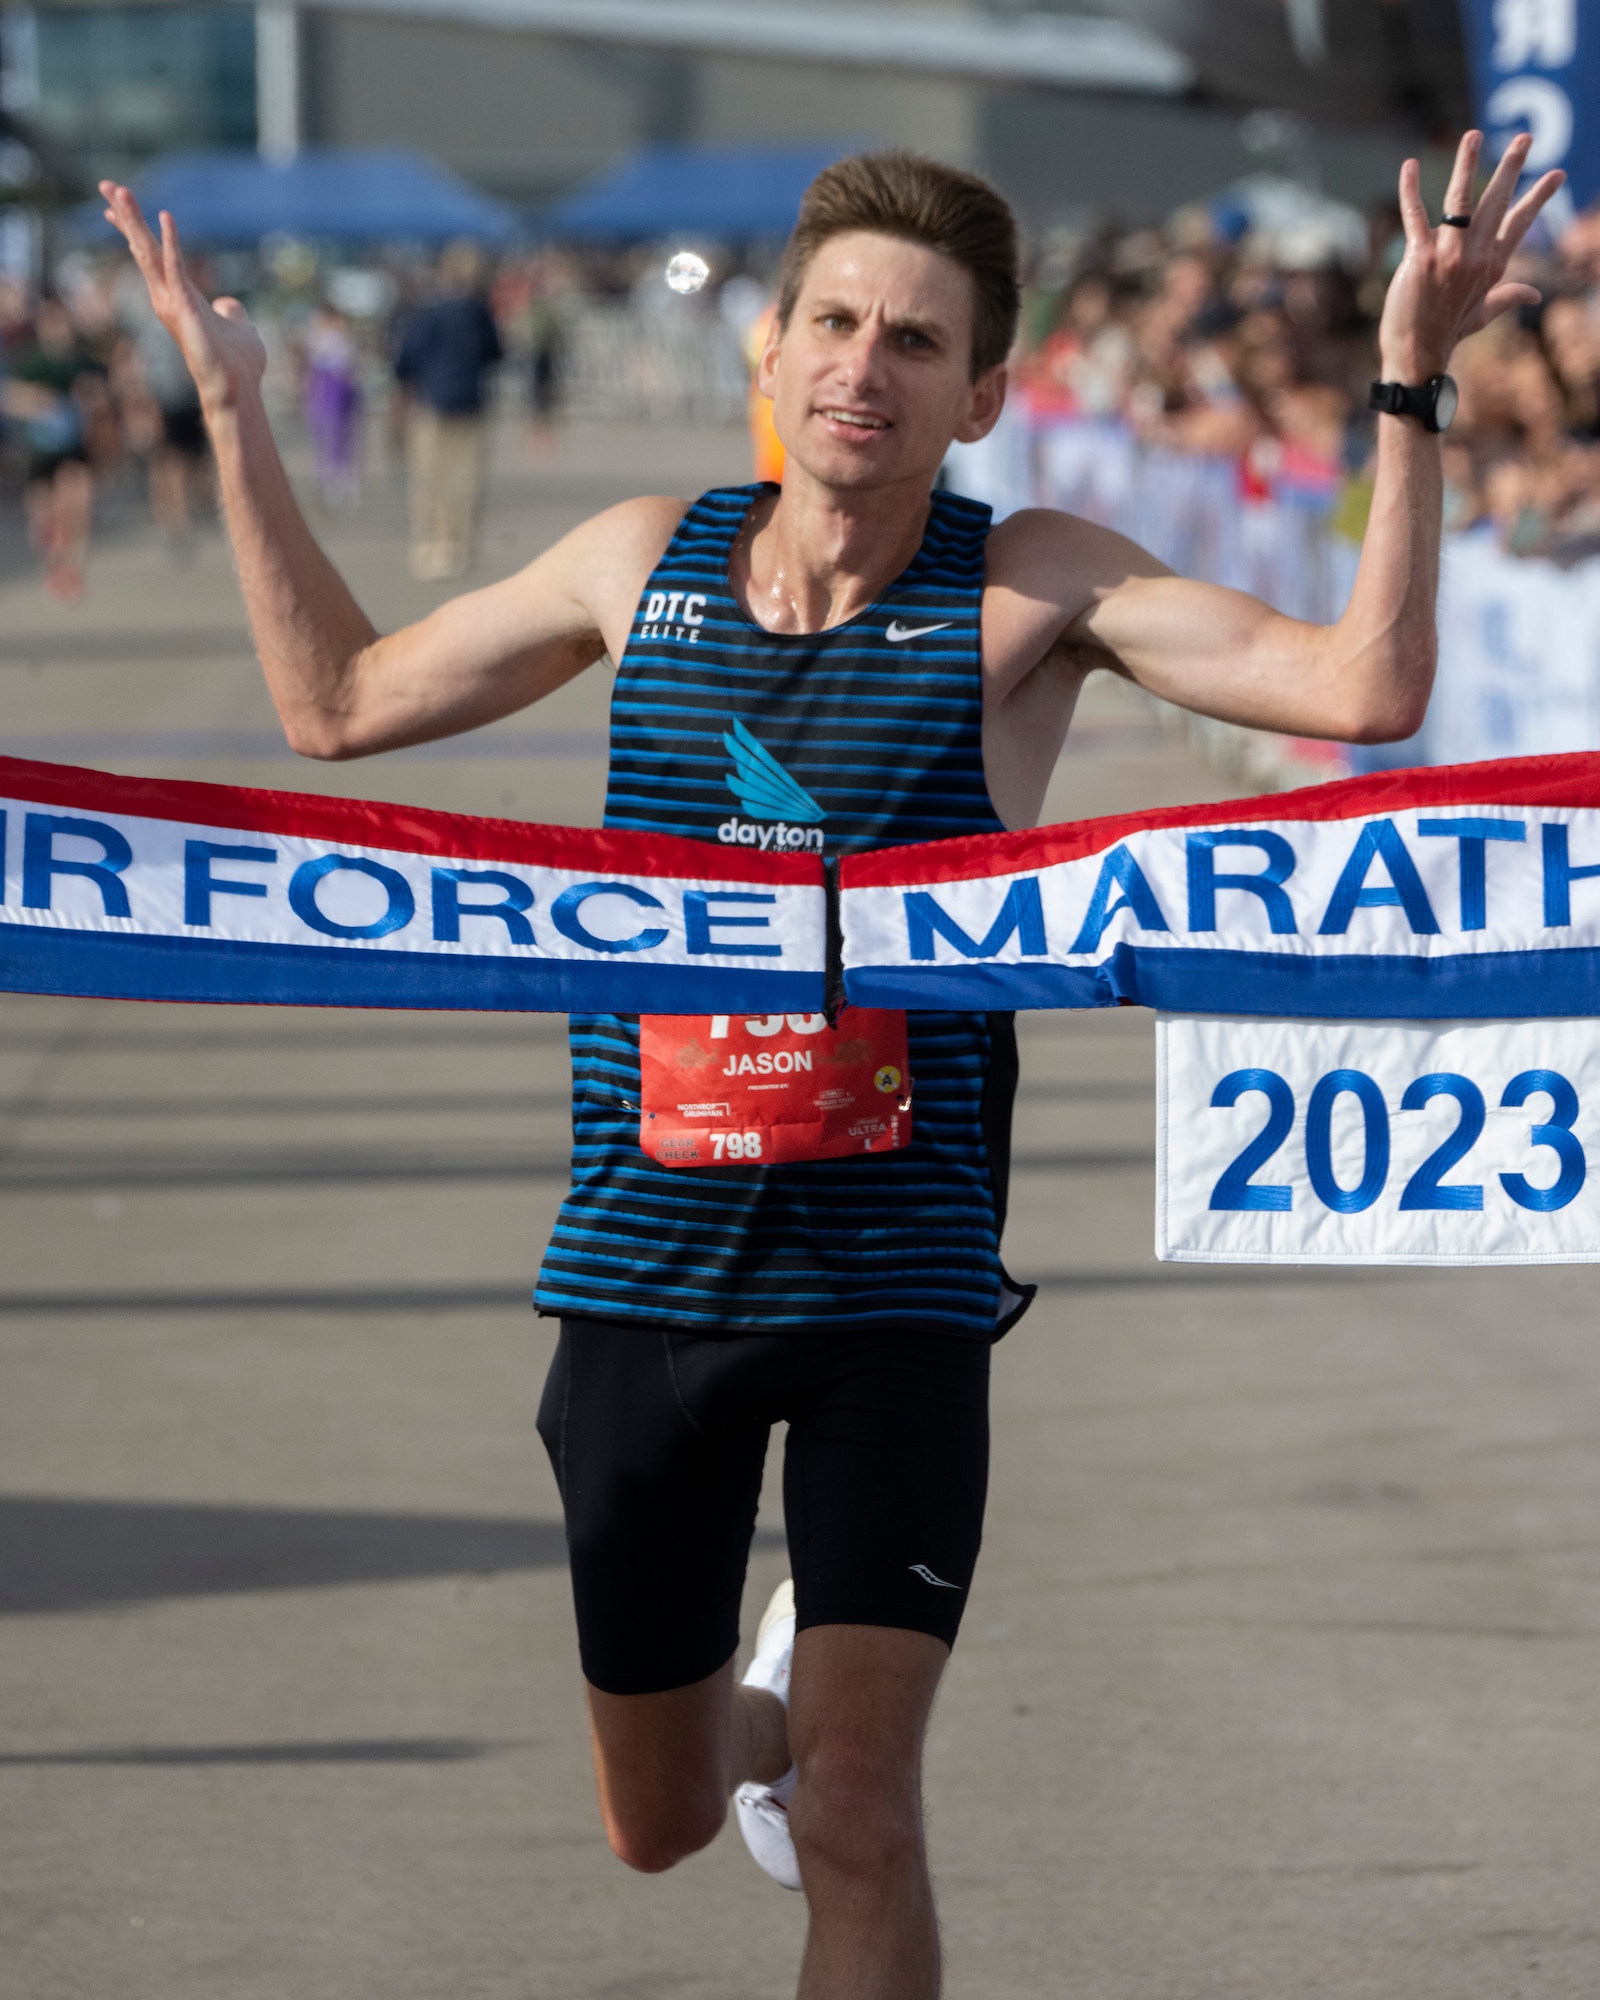 Man raises his arms as he approaches a red, white and blue banner that has "Air Force Marathon" on it.